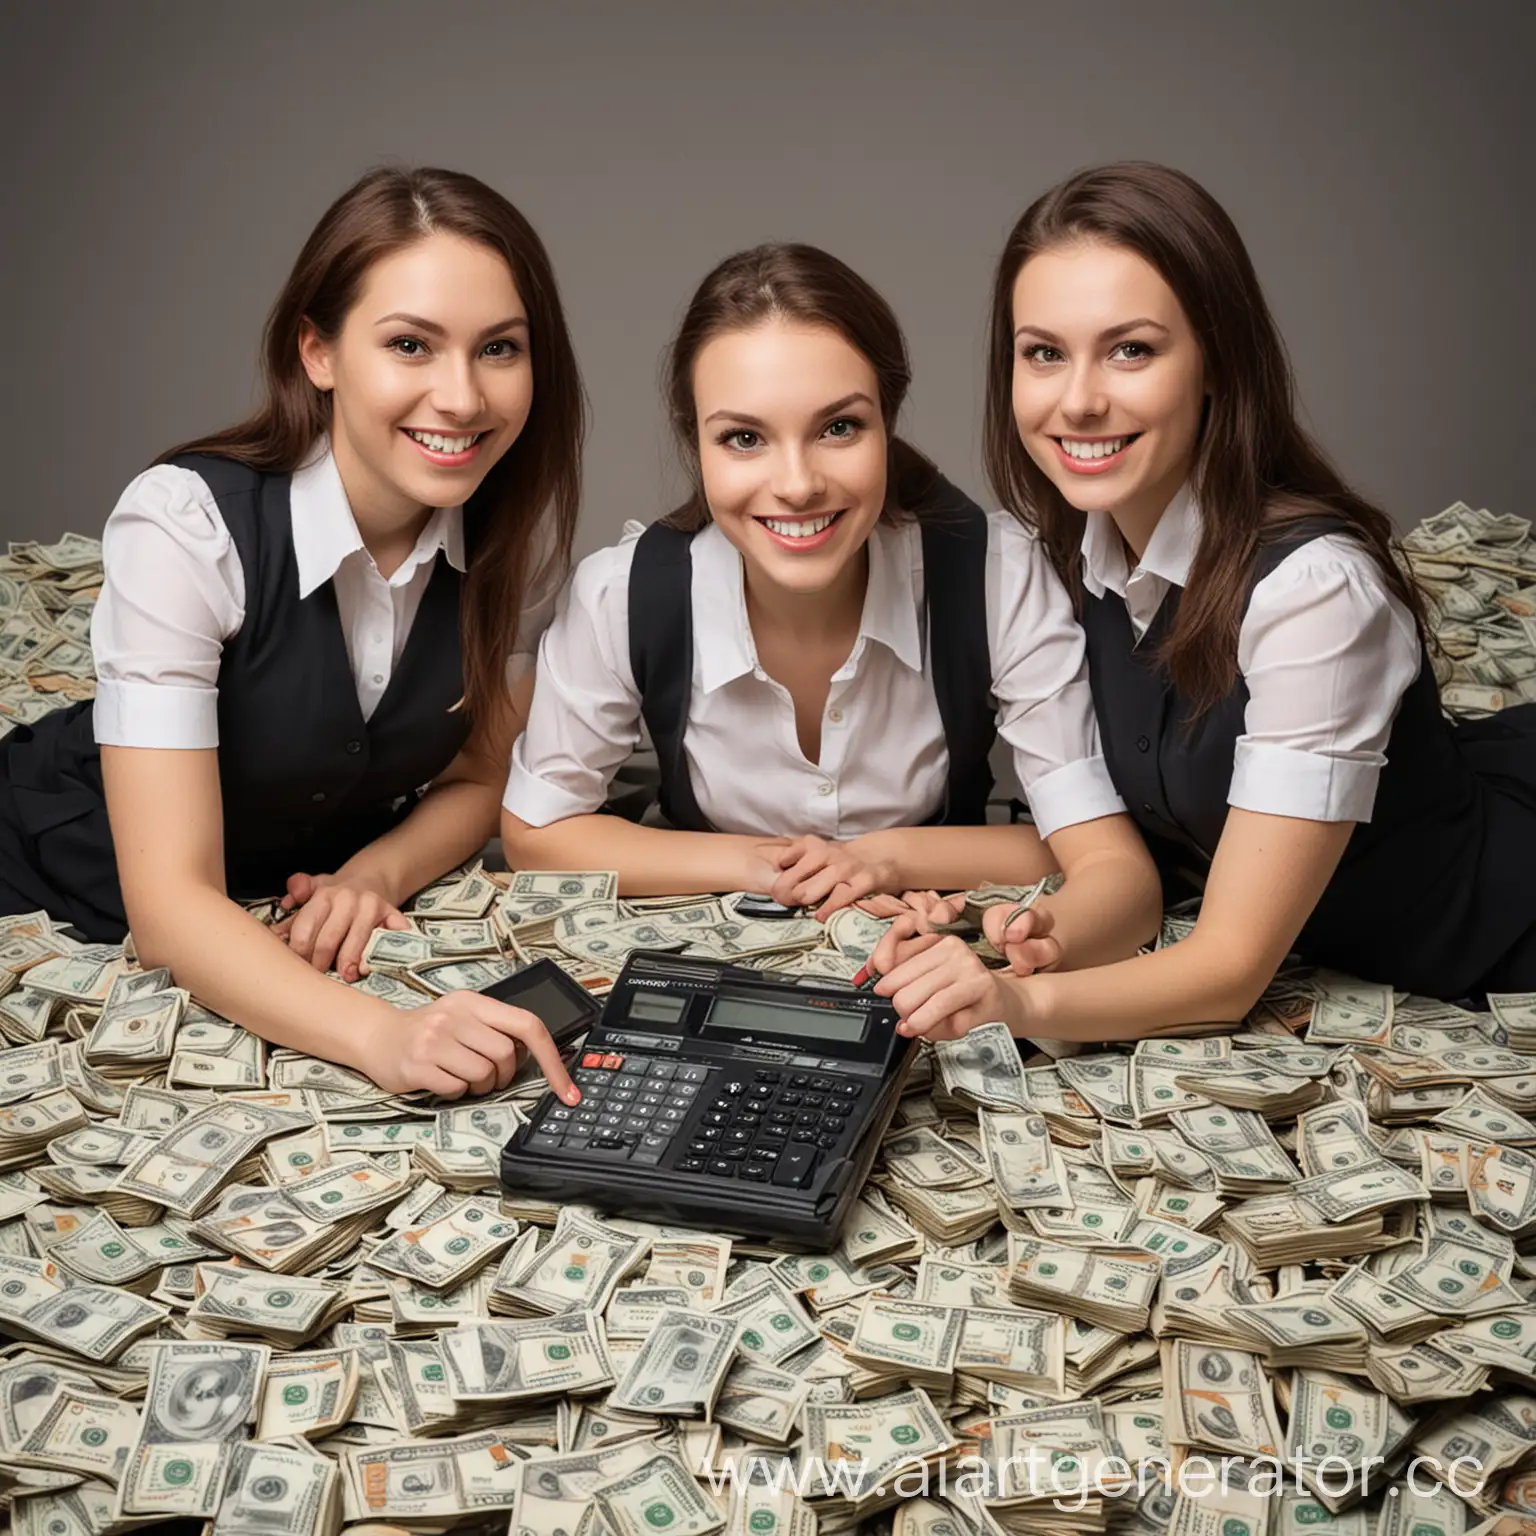 Female-Accountants-Smiling-on-Piles-of-Money-with-Calculators